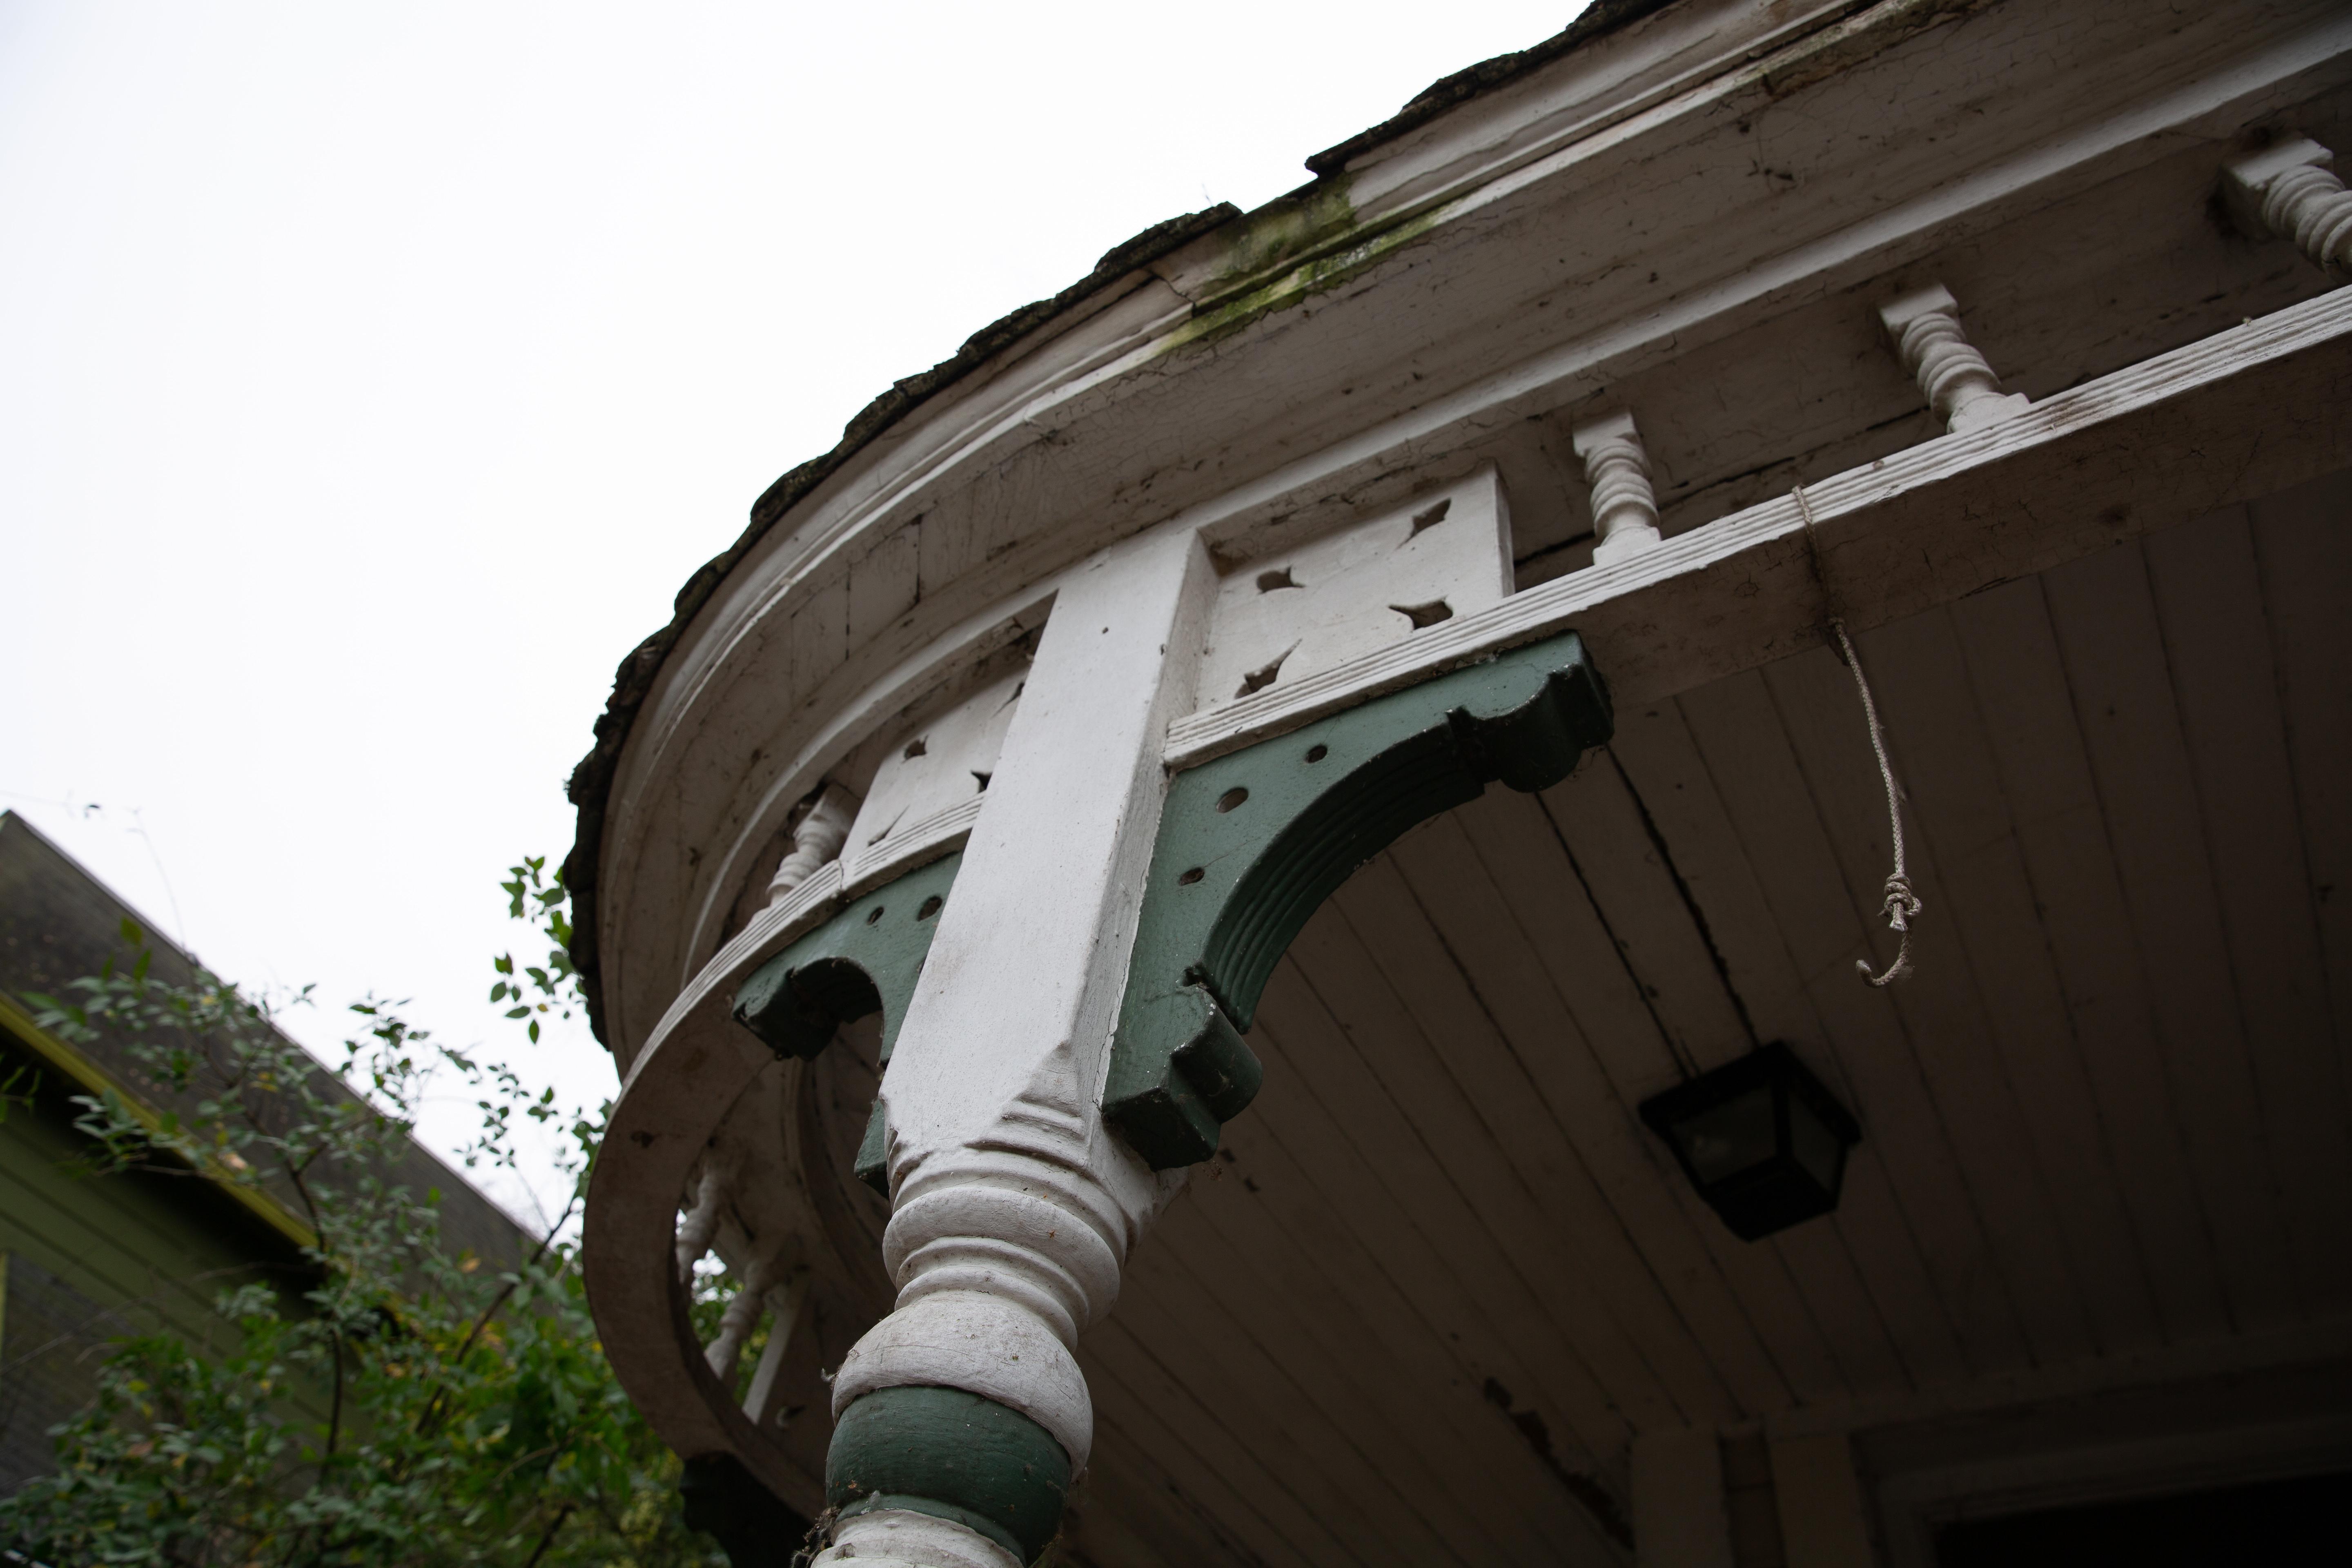 The house's significant architectural features include a curved porch with jigsaw ornament, and spindle ornament. 